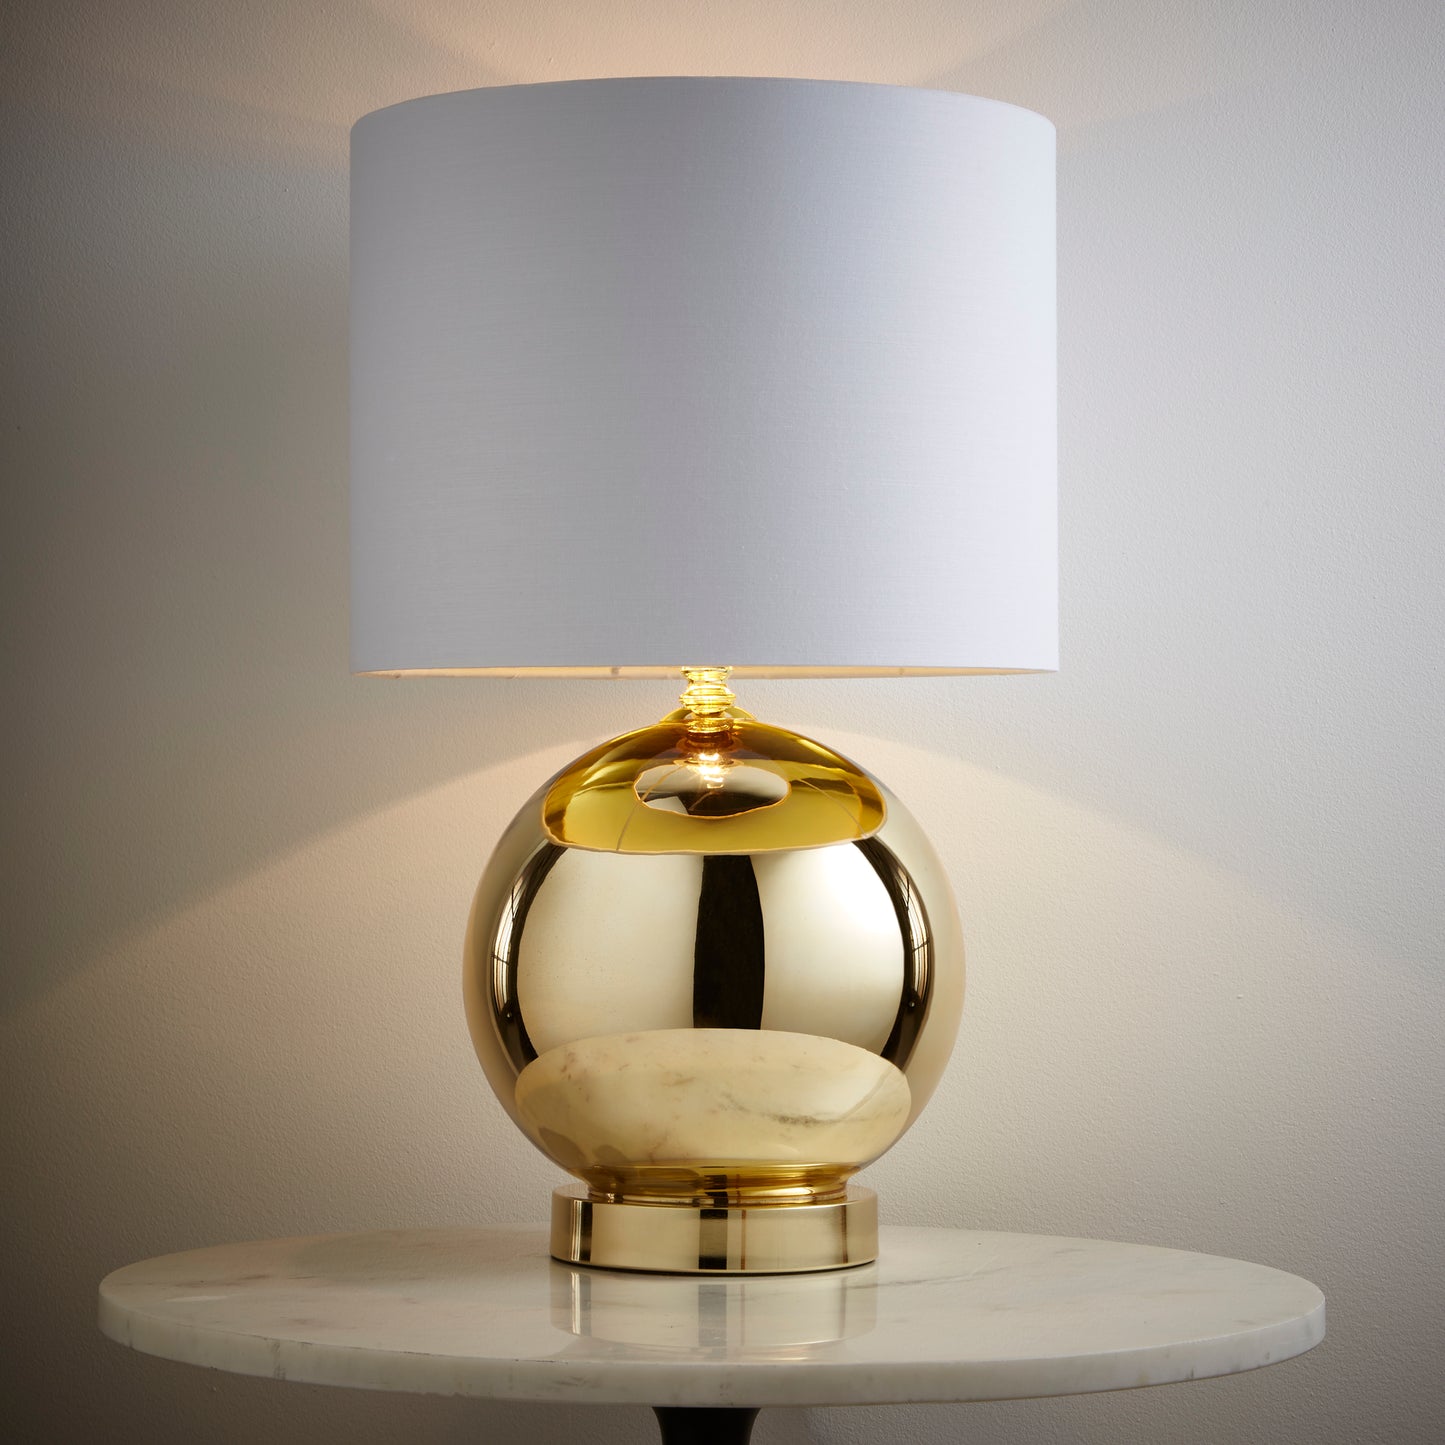 Kliving Ostend Polished Brass Table Lamp with White Drum Shade Home Lighting